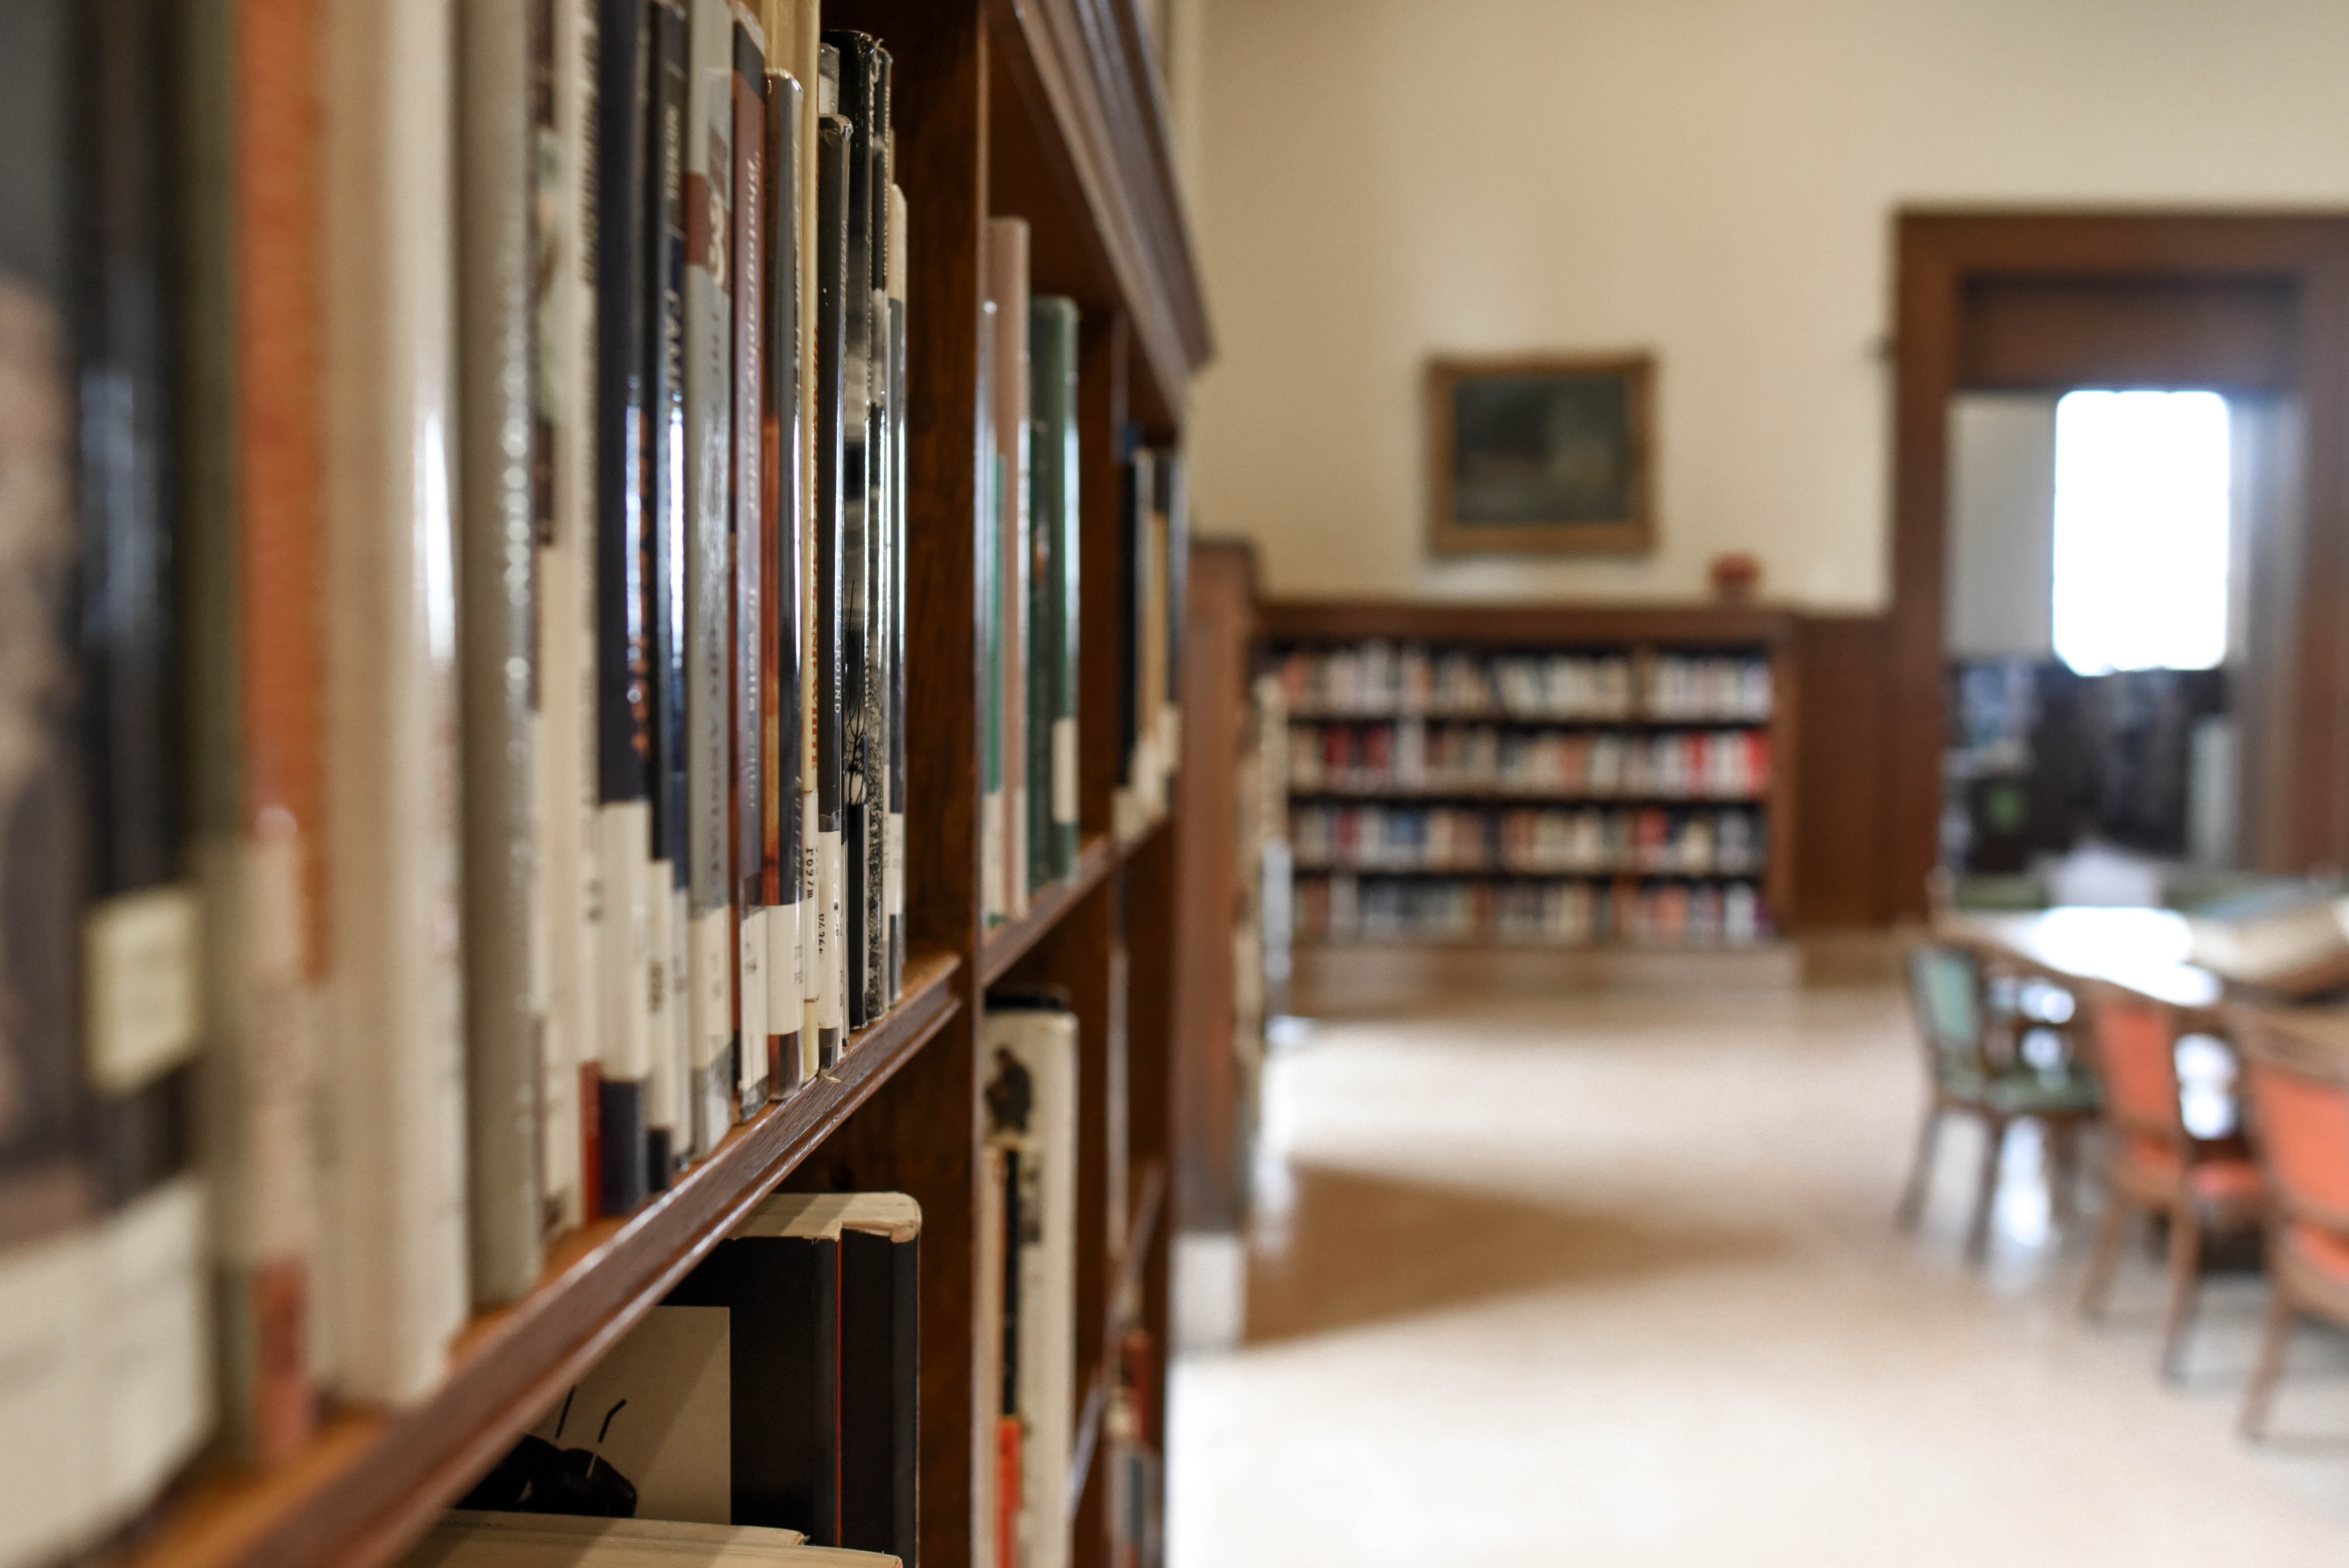 This is an image taken in a library. In the background, there is the blurred image of chairs and bookshelves, while the focus of the image is on a bookshelf with books on the left side.